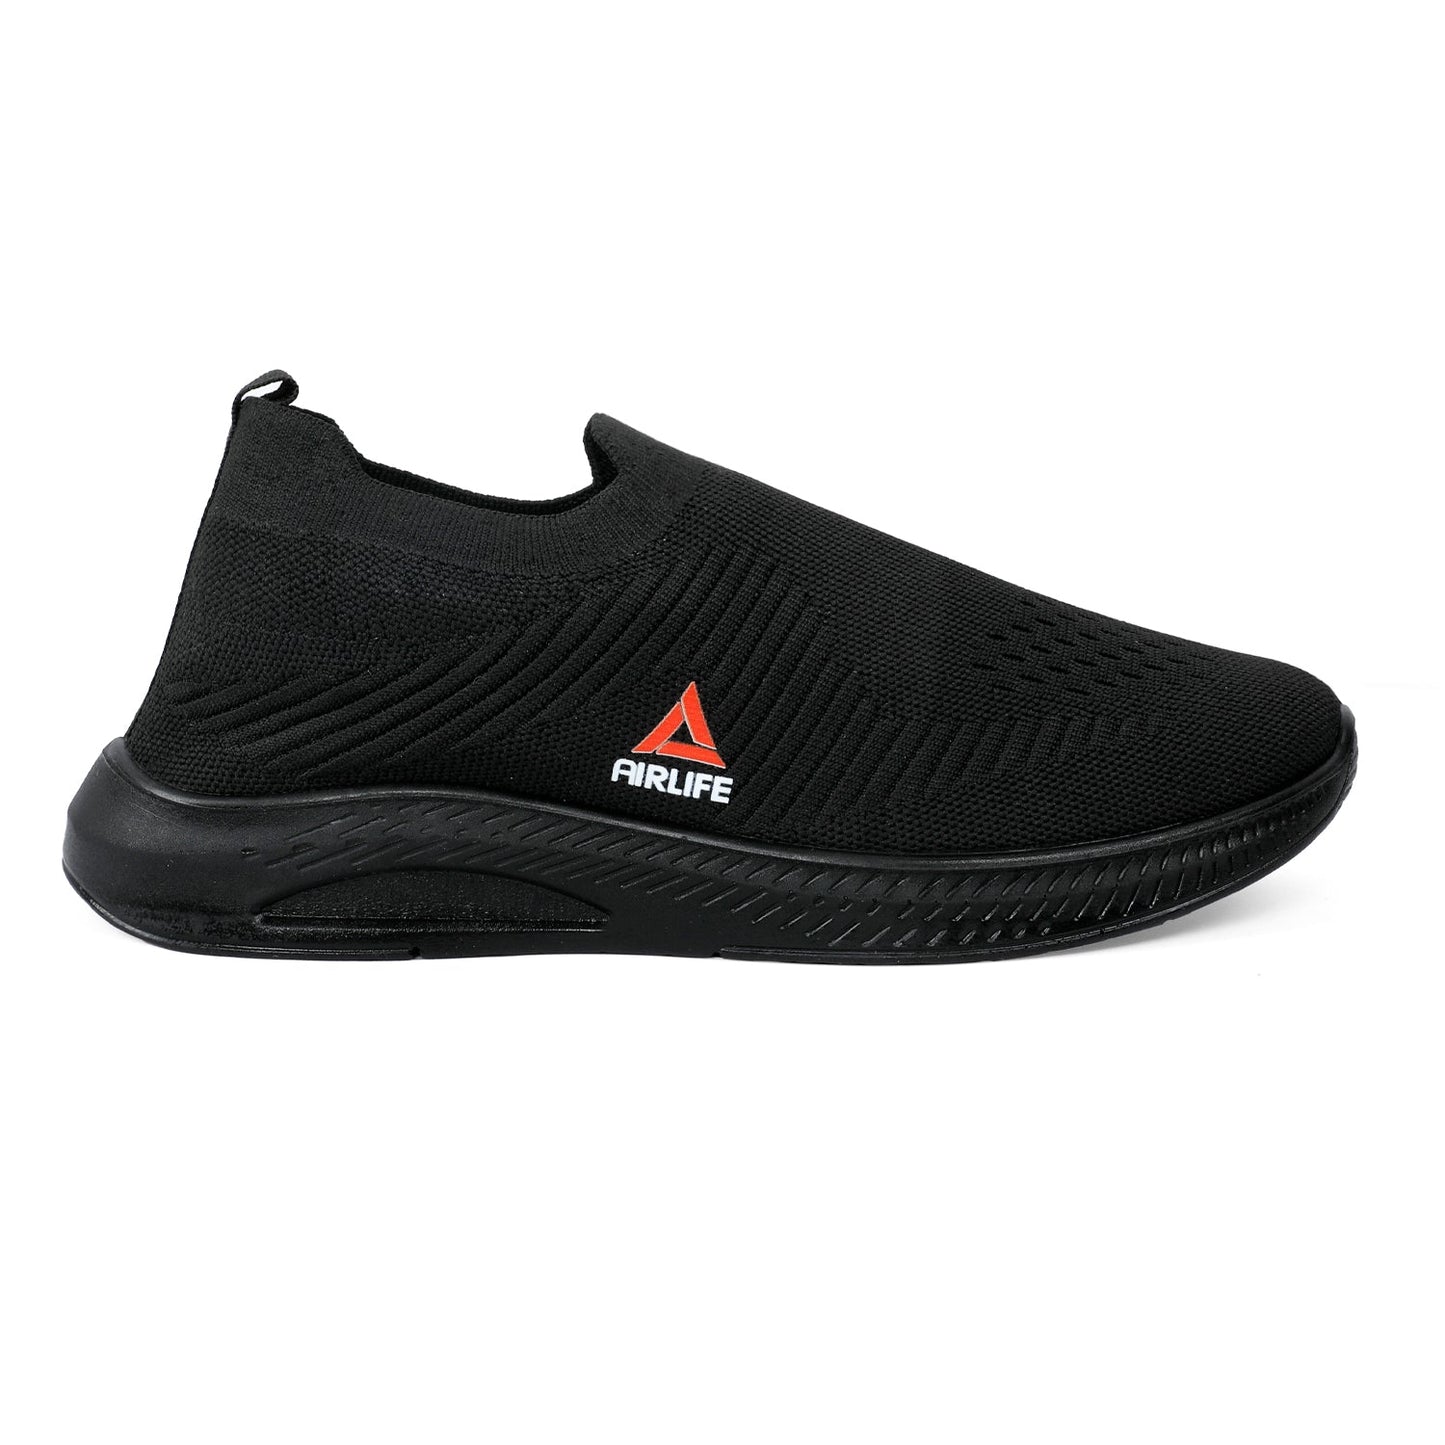 AIRLIFE SHOES - BLACK MIX2393 Activ Abou Alaa